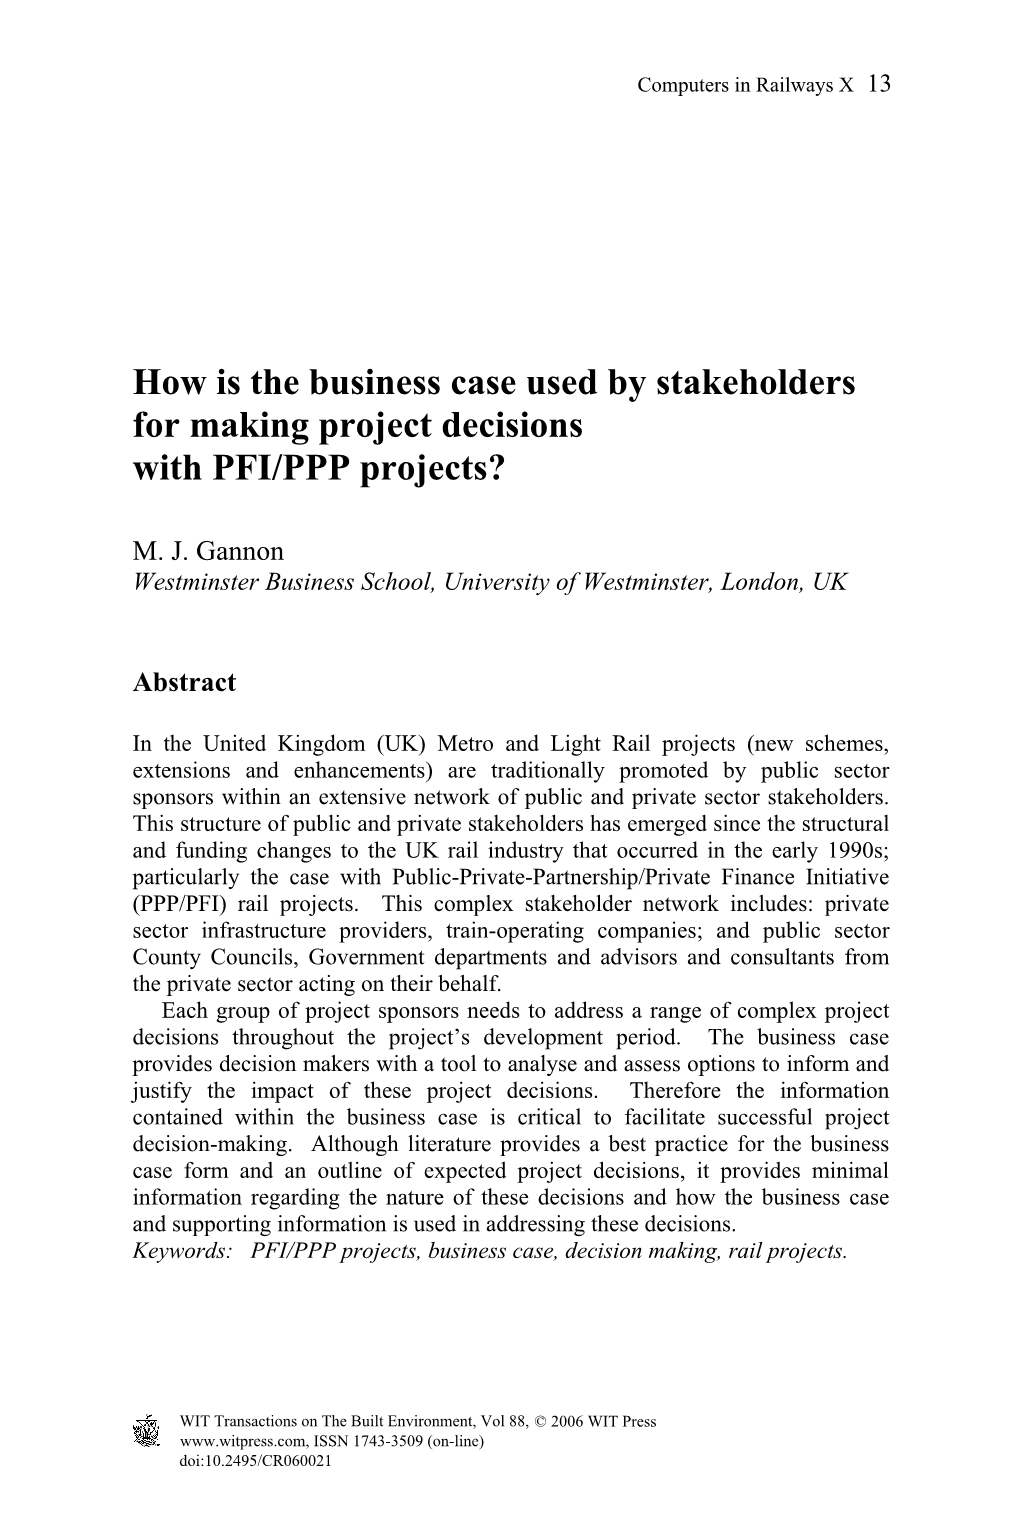 How Is the Business Case Used by Stakeholders for Making Project Decisions with PFI/PPP Projects?